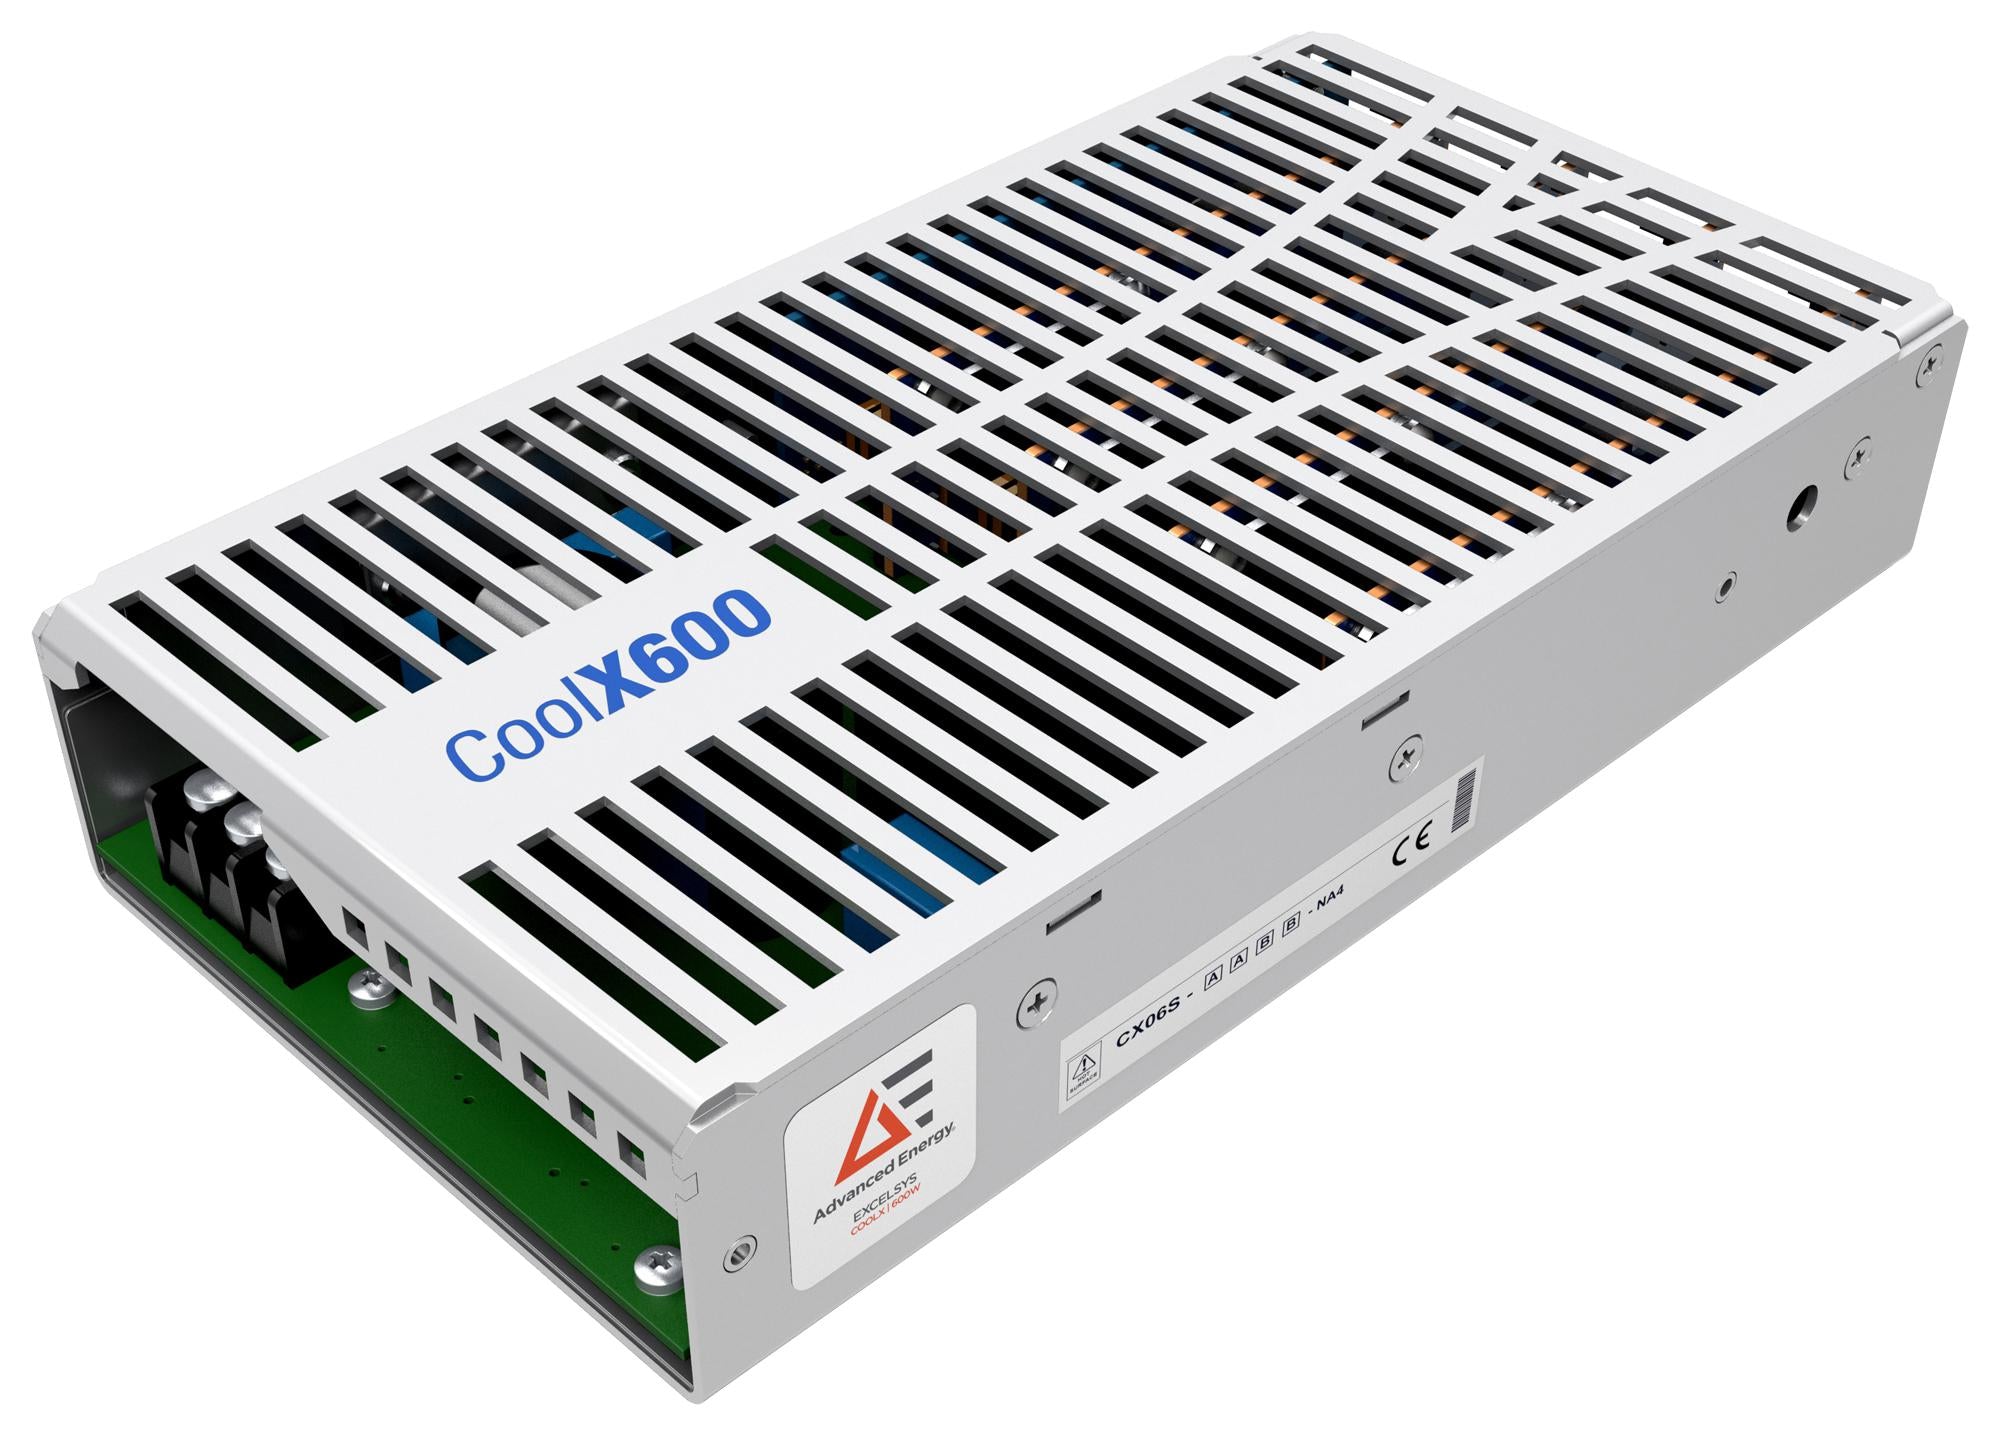 CX06S-0000-N-A CONFIGURABLE POWER COOLPAC 4SLOT CHASSIS ADVANCED ENERGY